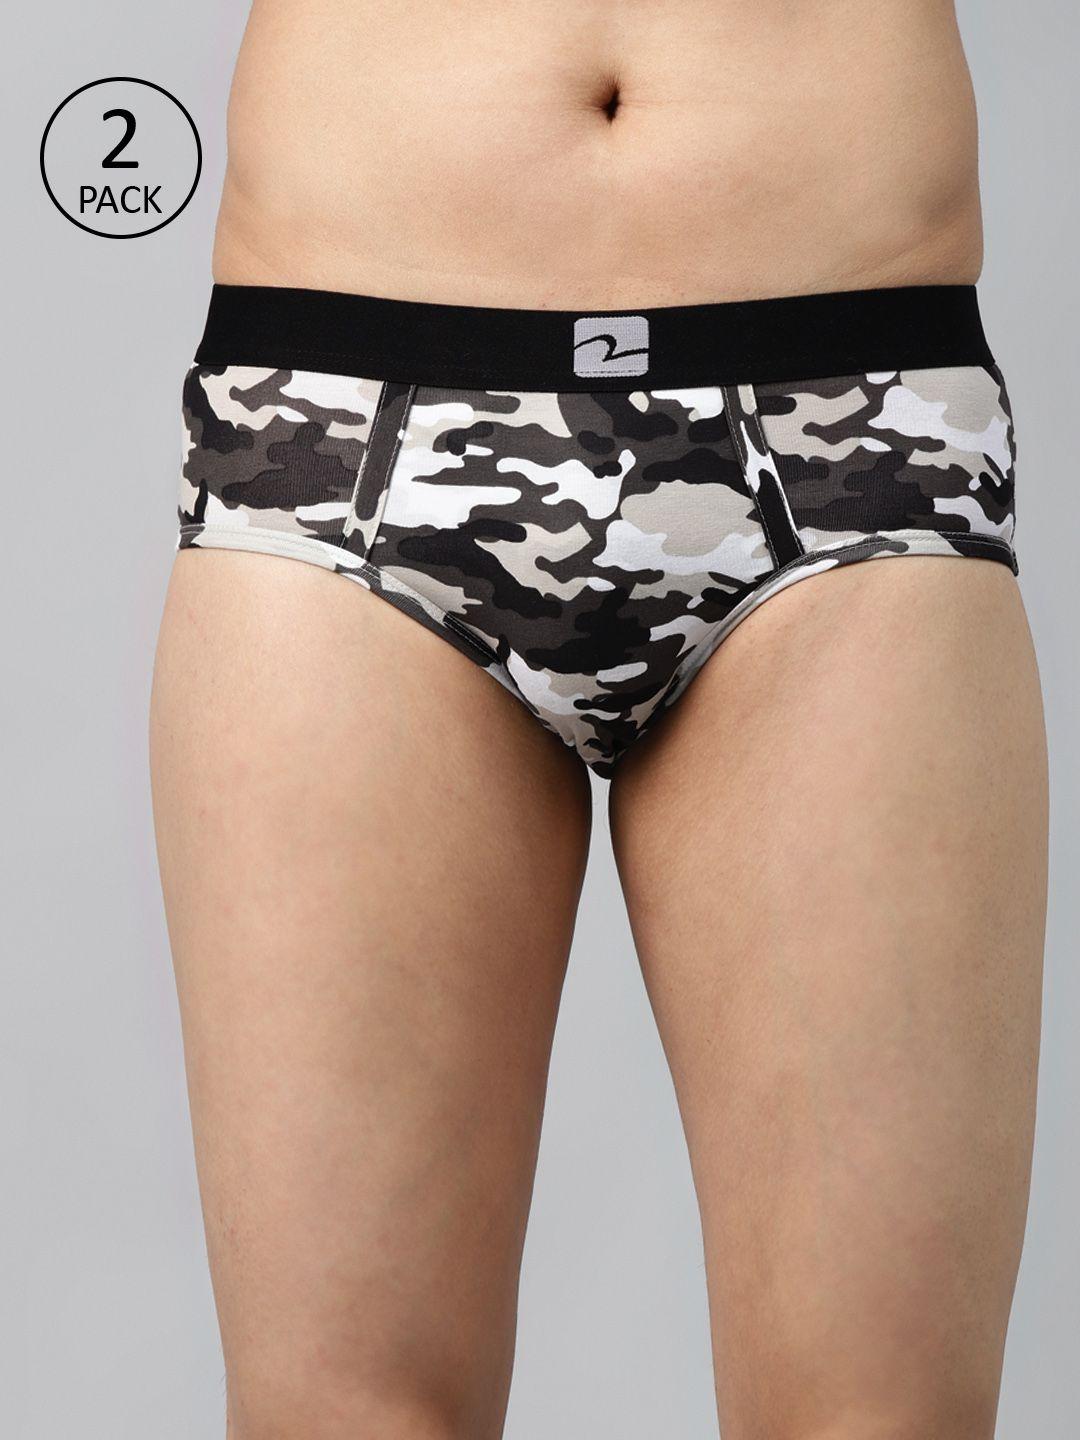 underjeans by spykar pack of 2 charcoal grey & white camouflage print briefs 8907966429857